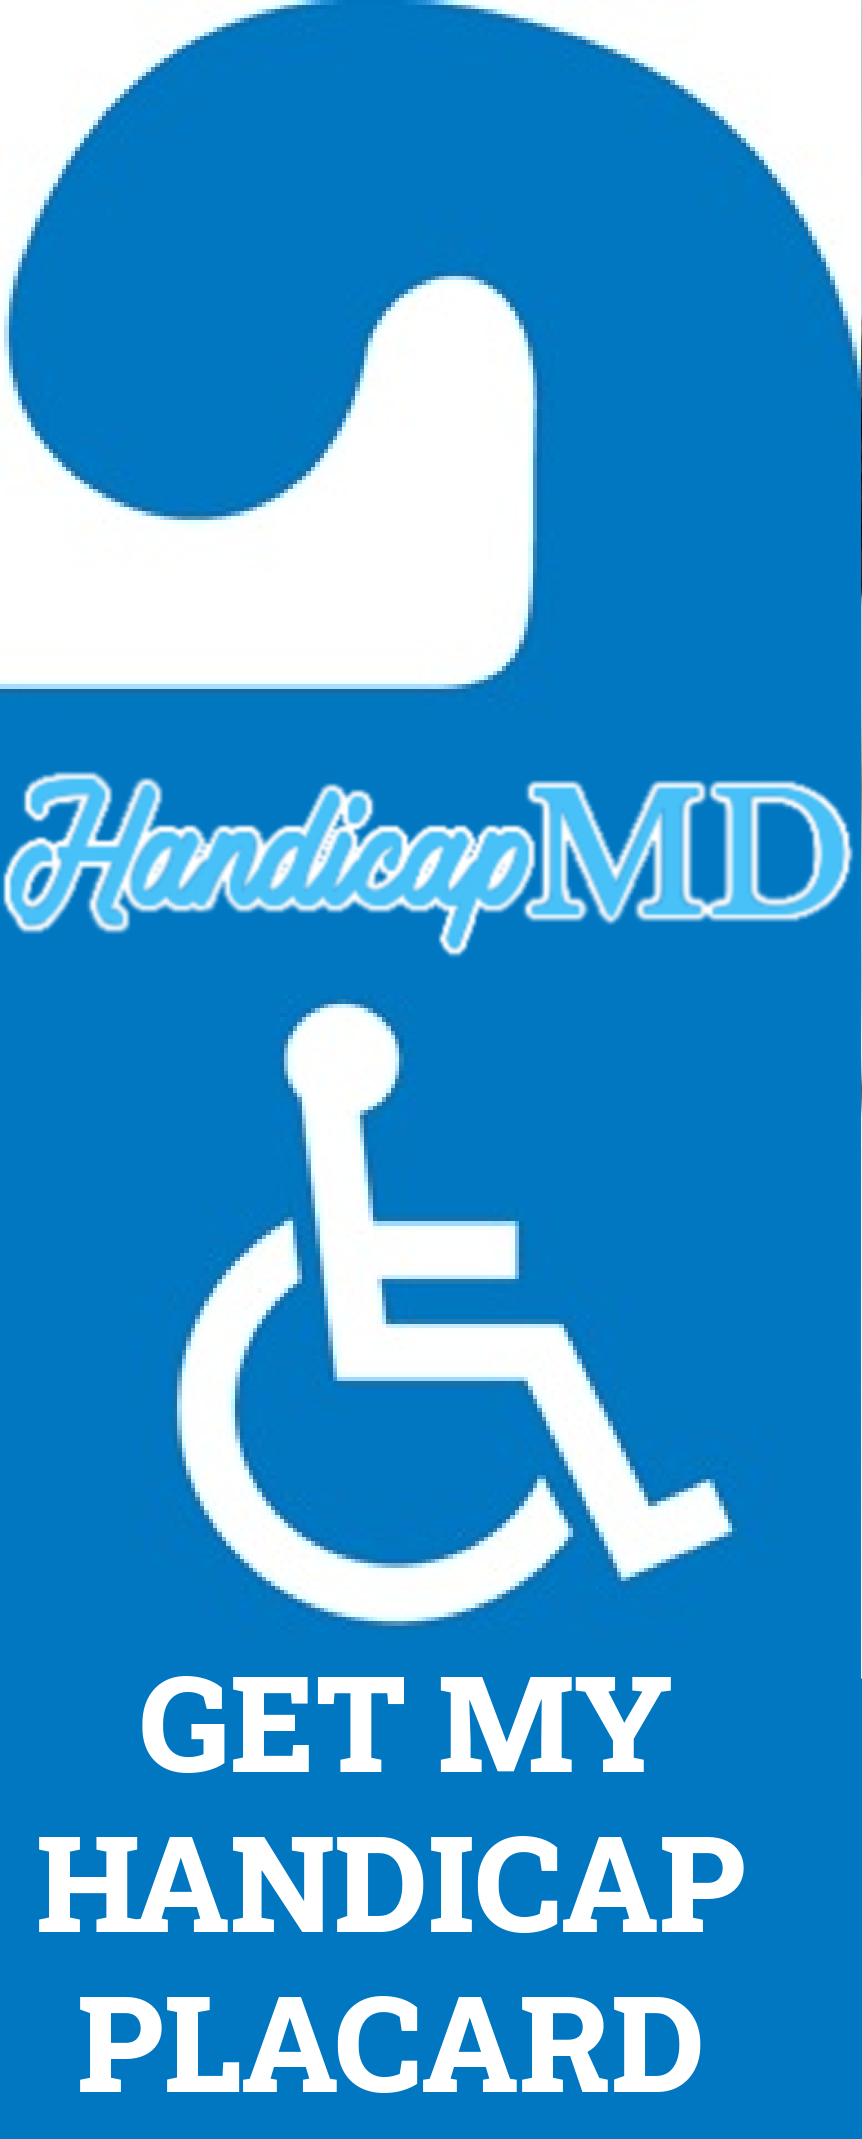 How to Replace a Lost or Stolen Handicap Placard in Maine